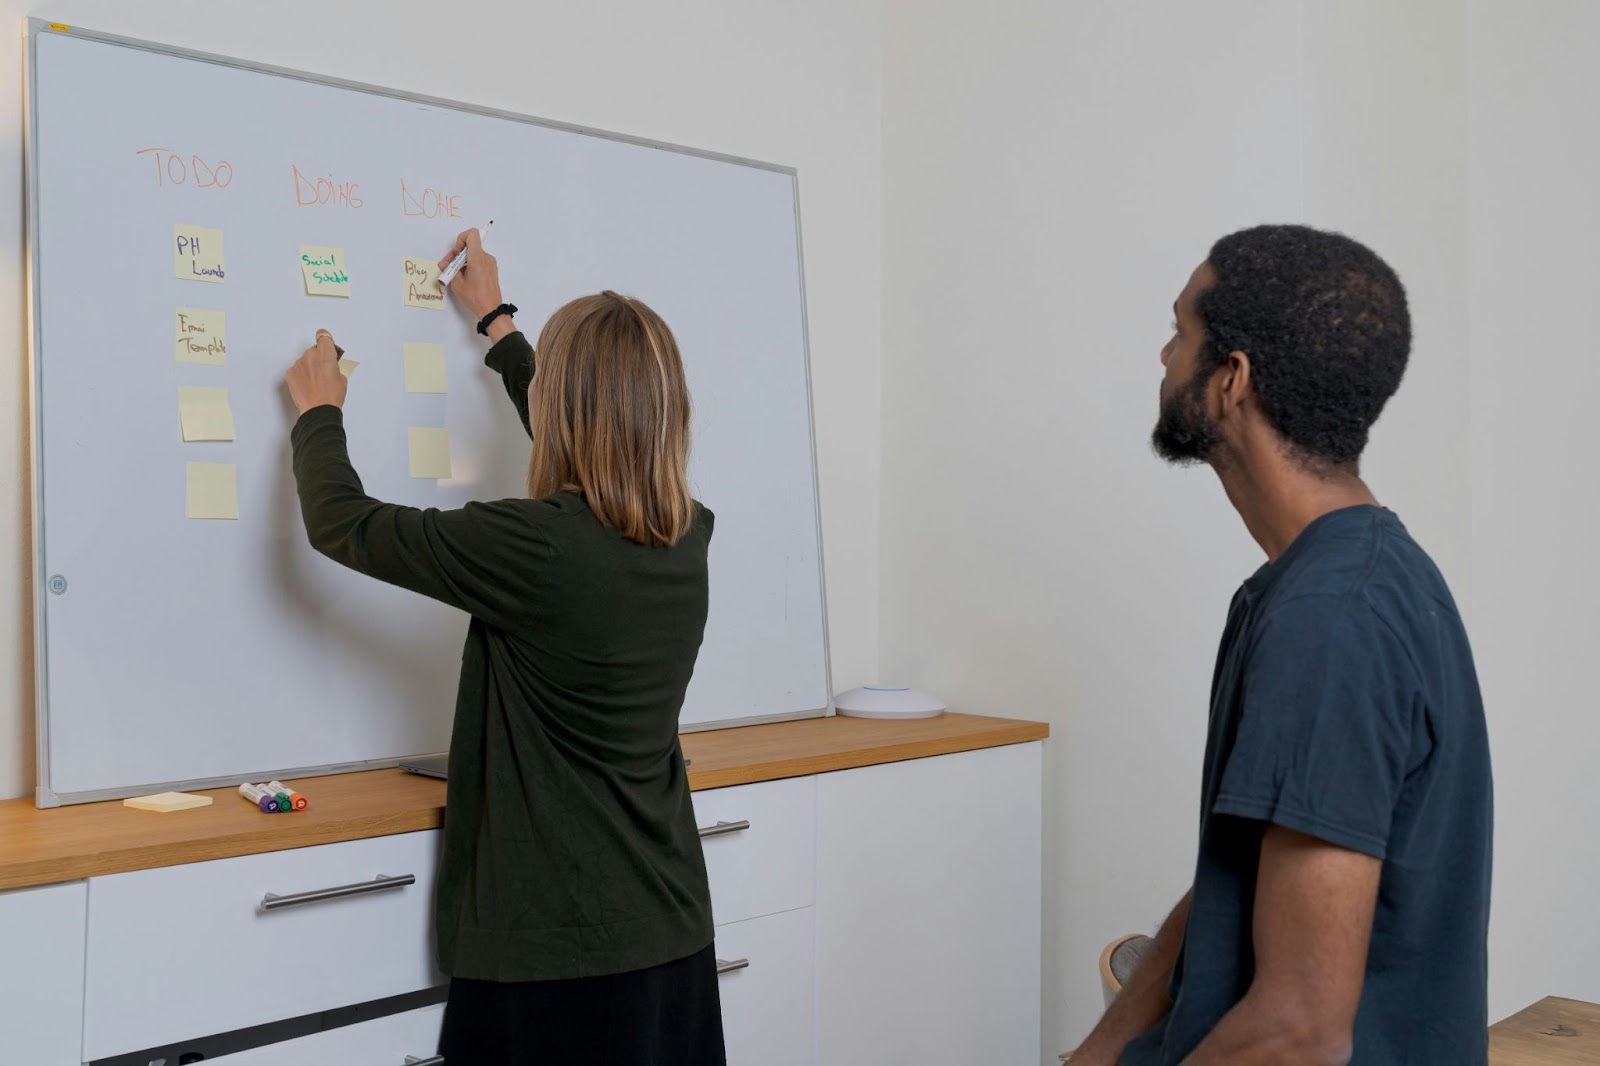 a woman placing sticky notes on a board with Todo, In progress and Done columns while a man watching attentively